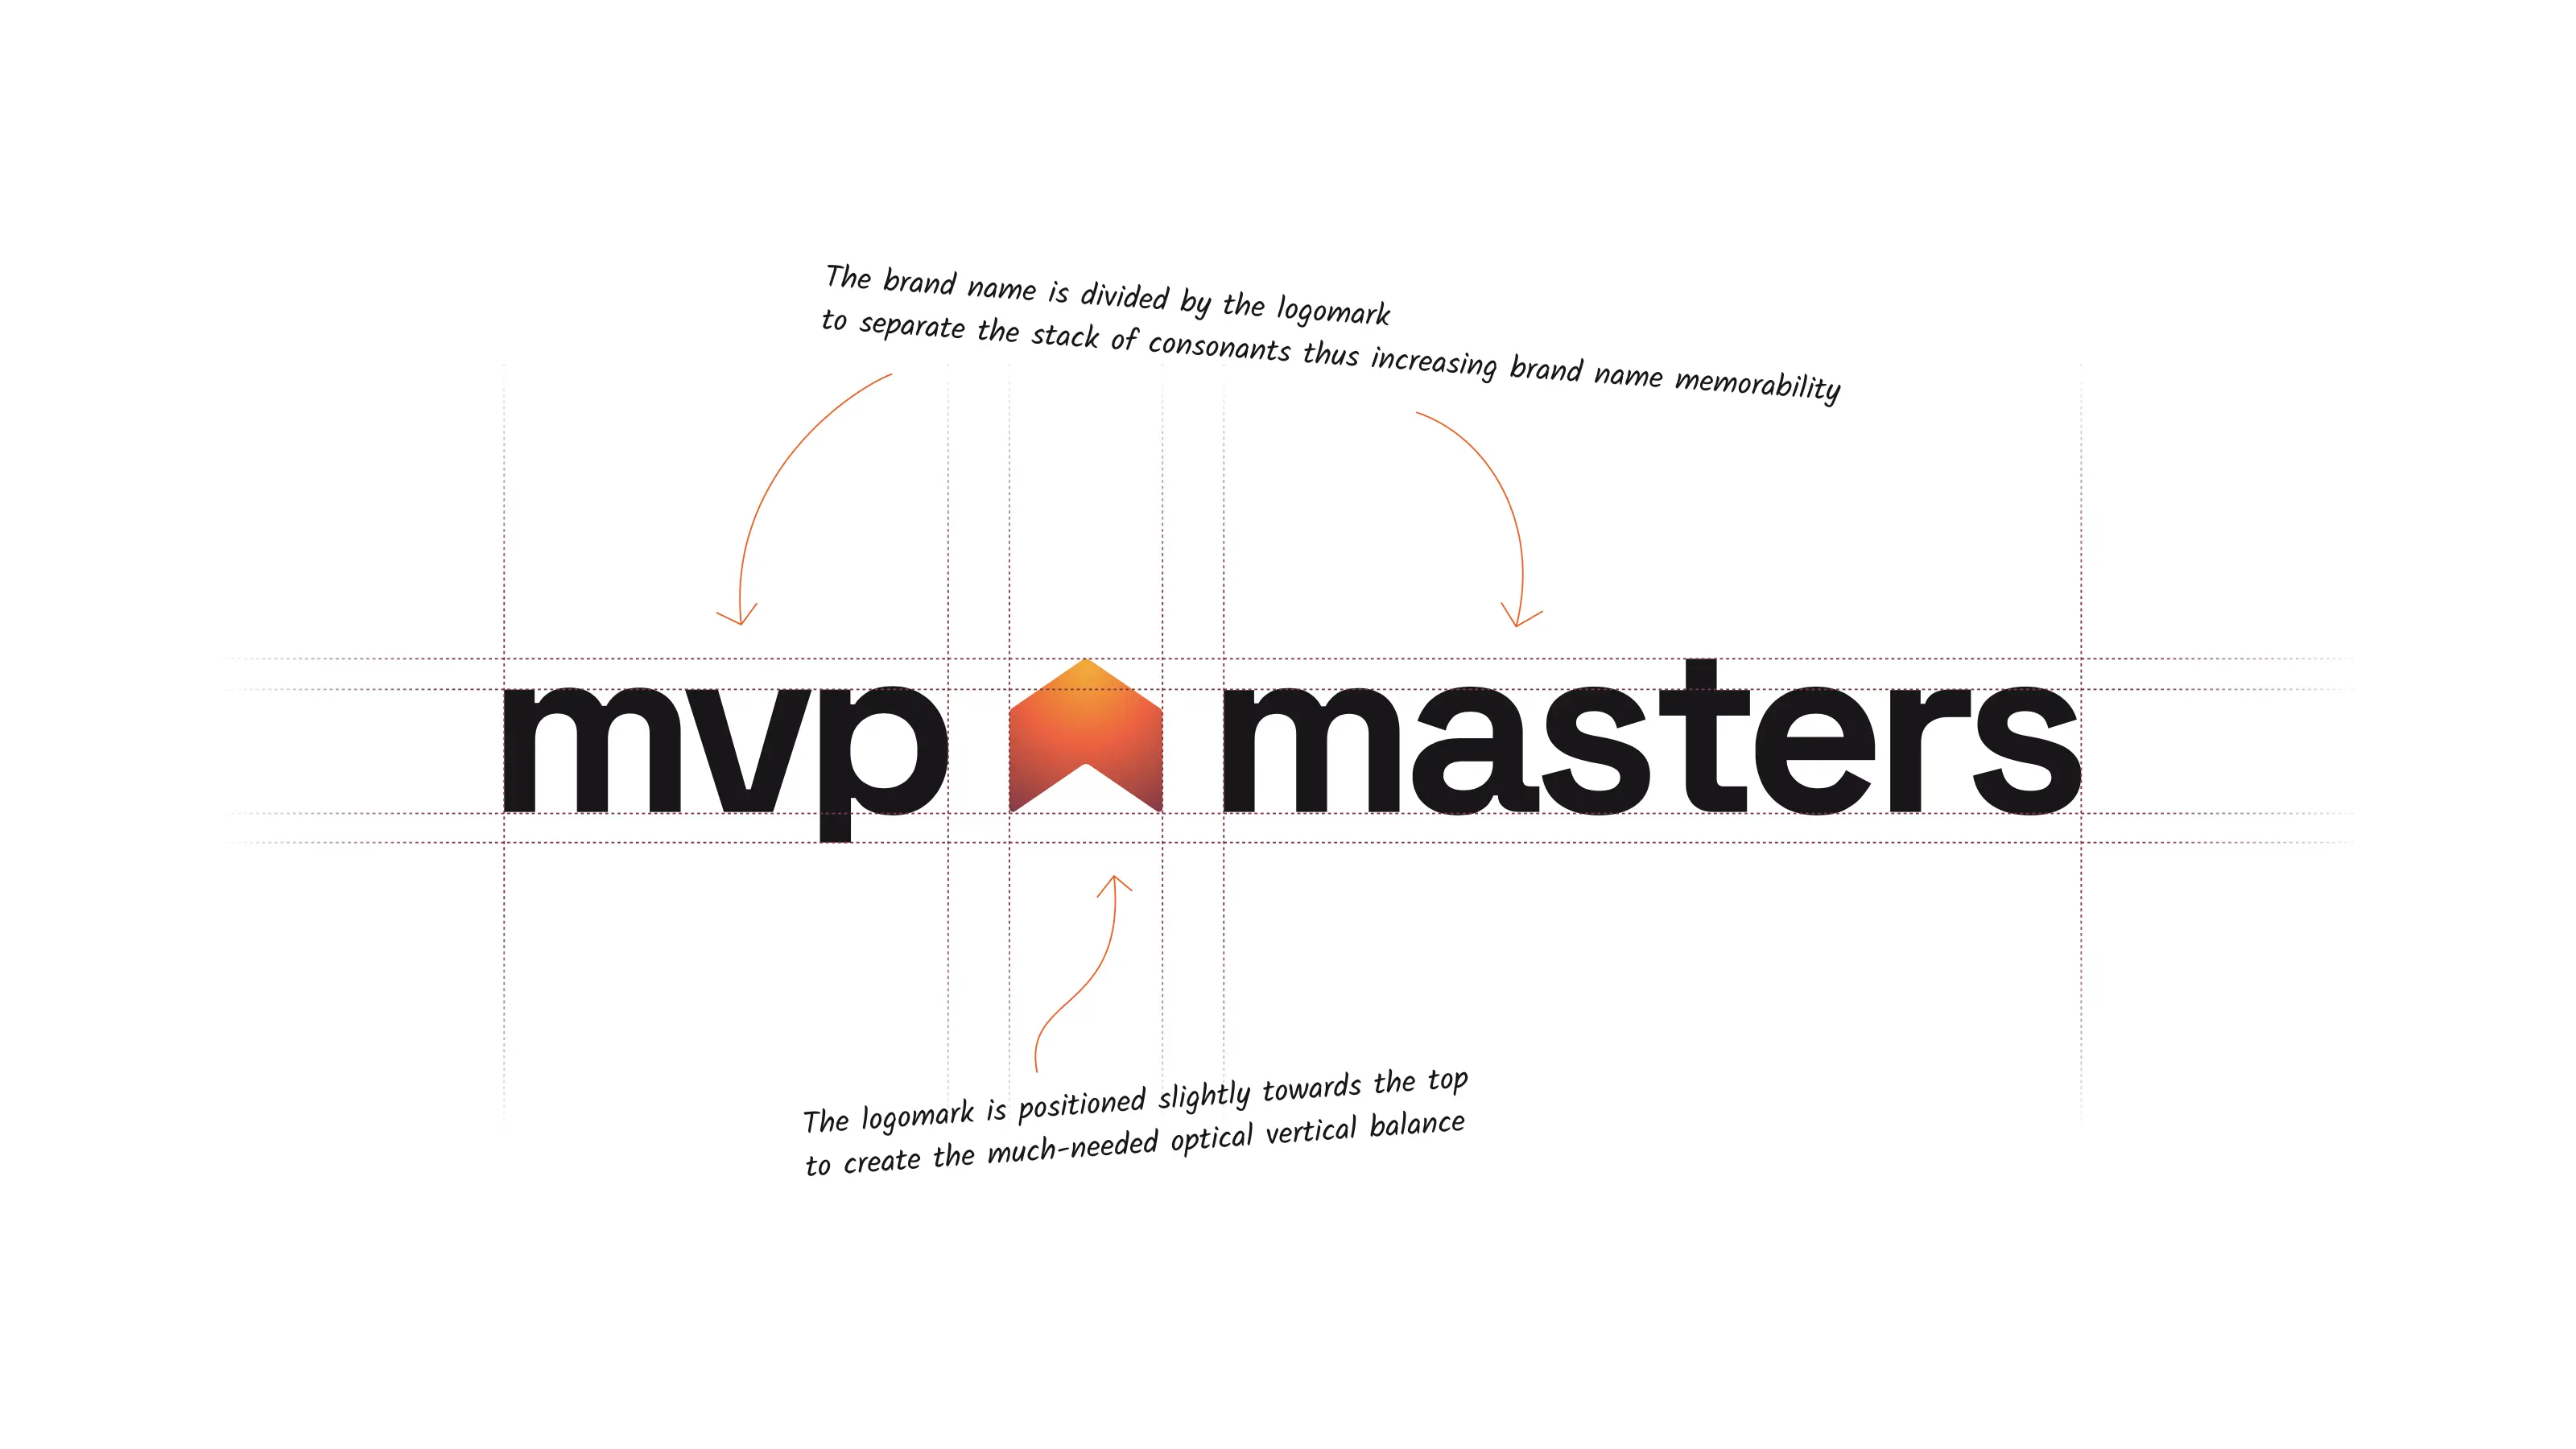 MVP Masters - Get Your MVP to Market in Just 3 Months